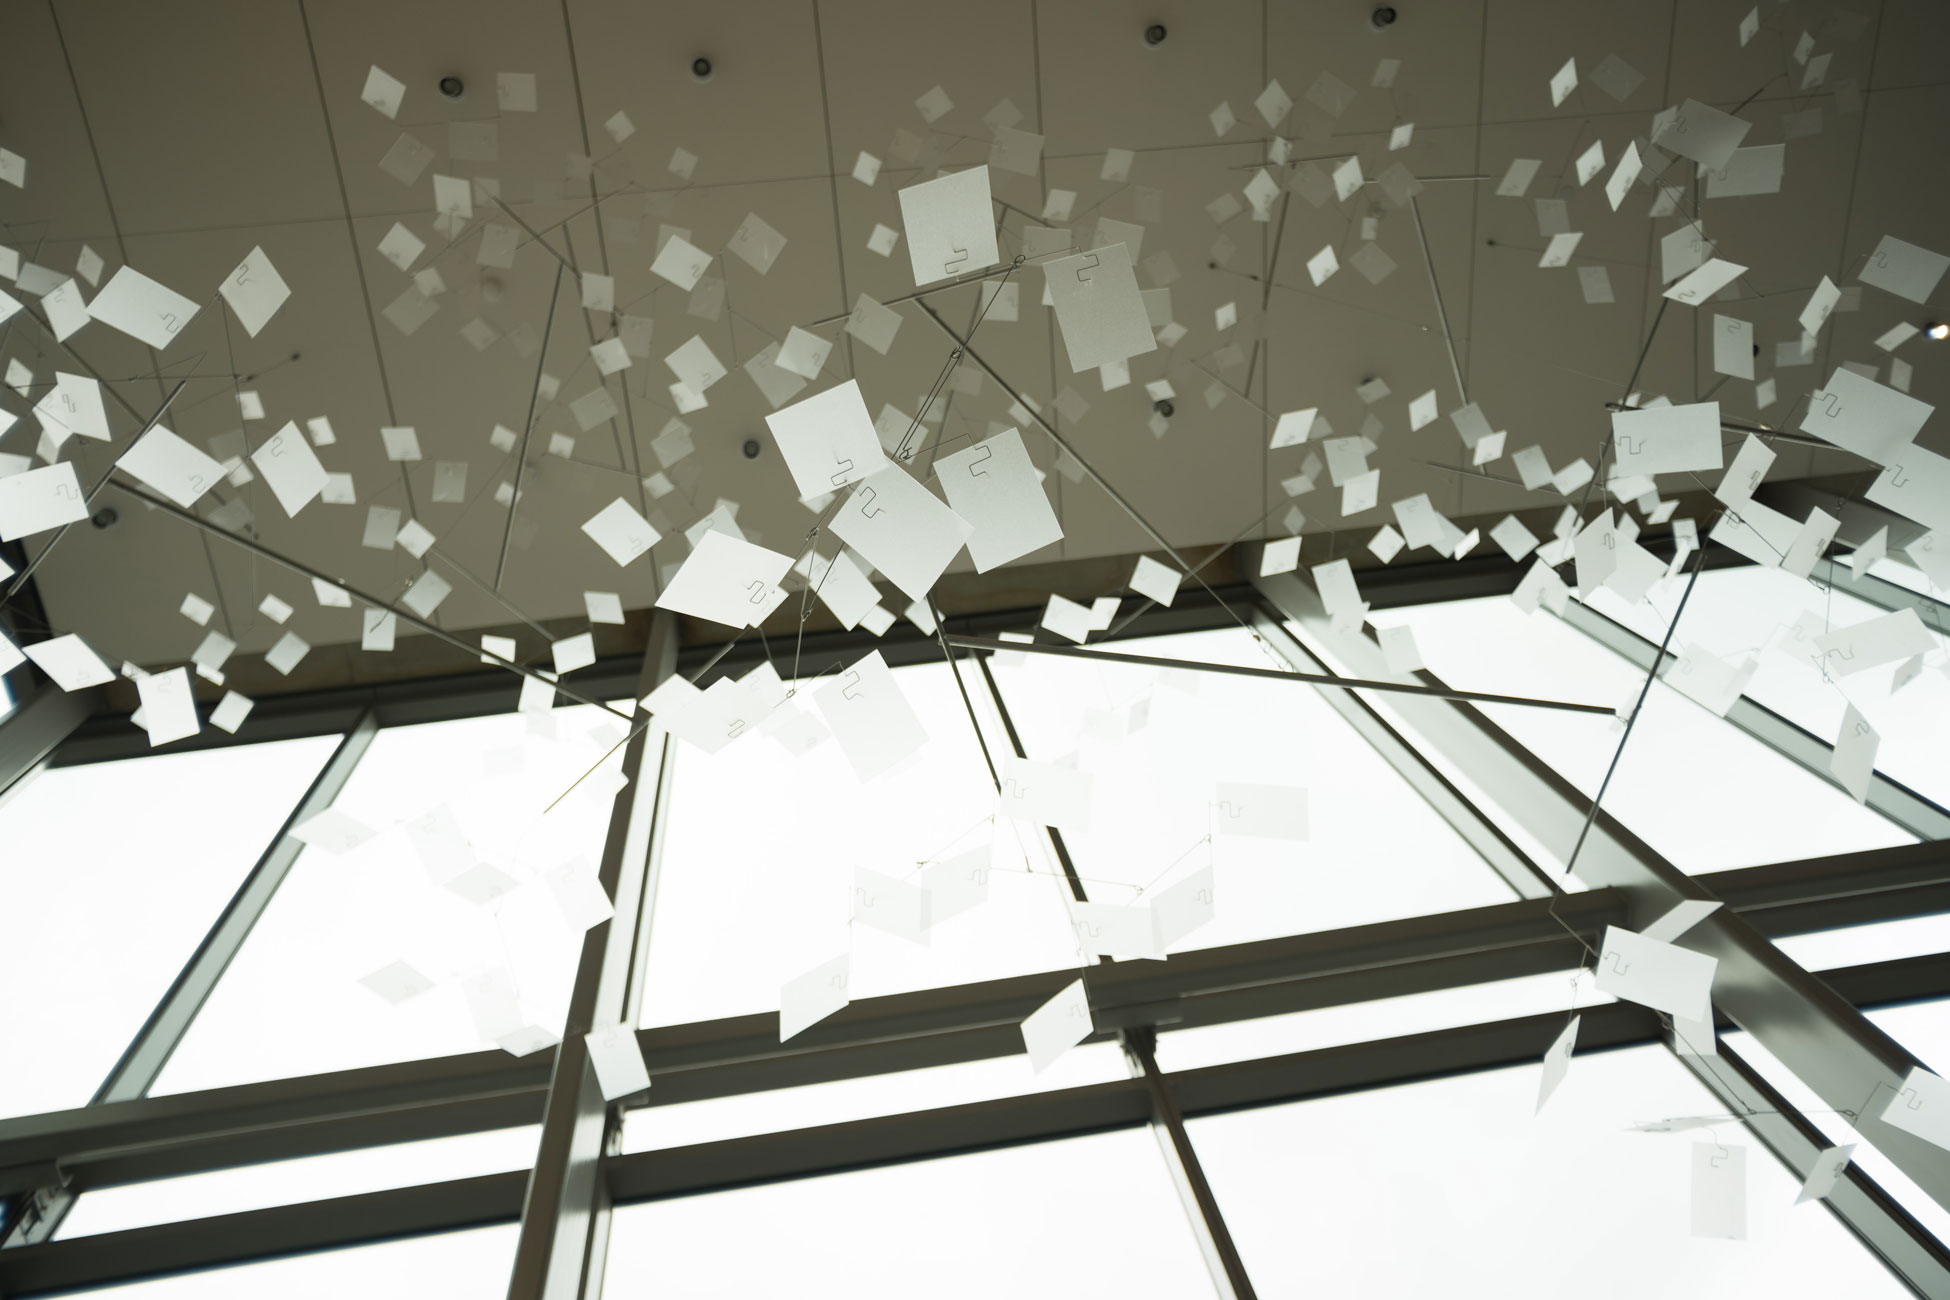 Blank white cards hang in an art installation at the Knight Cancer Research Building